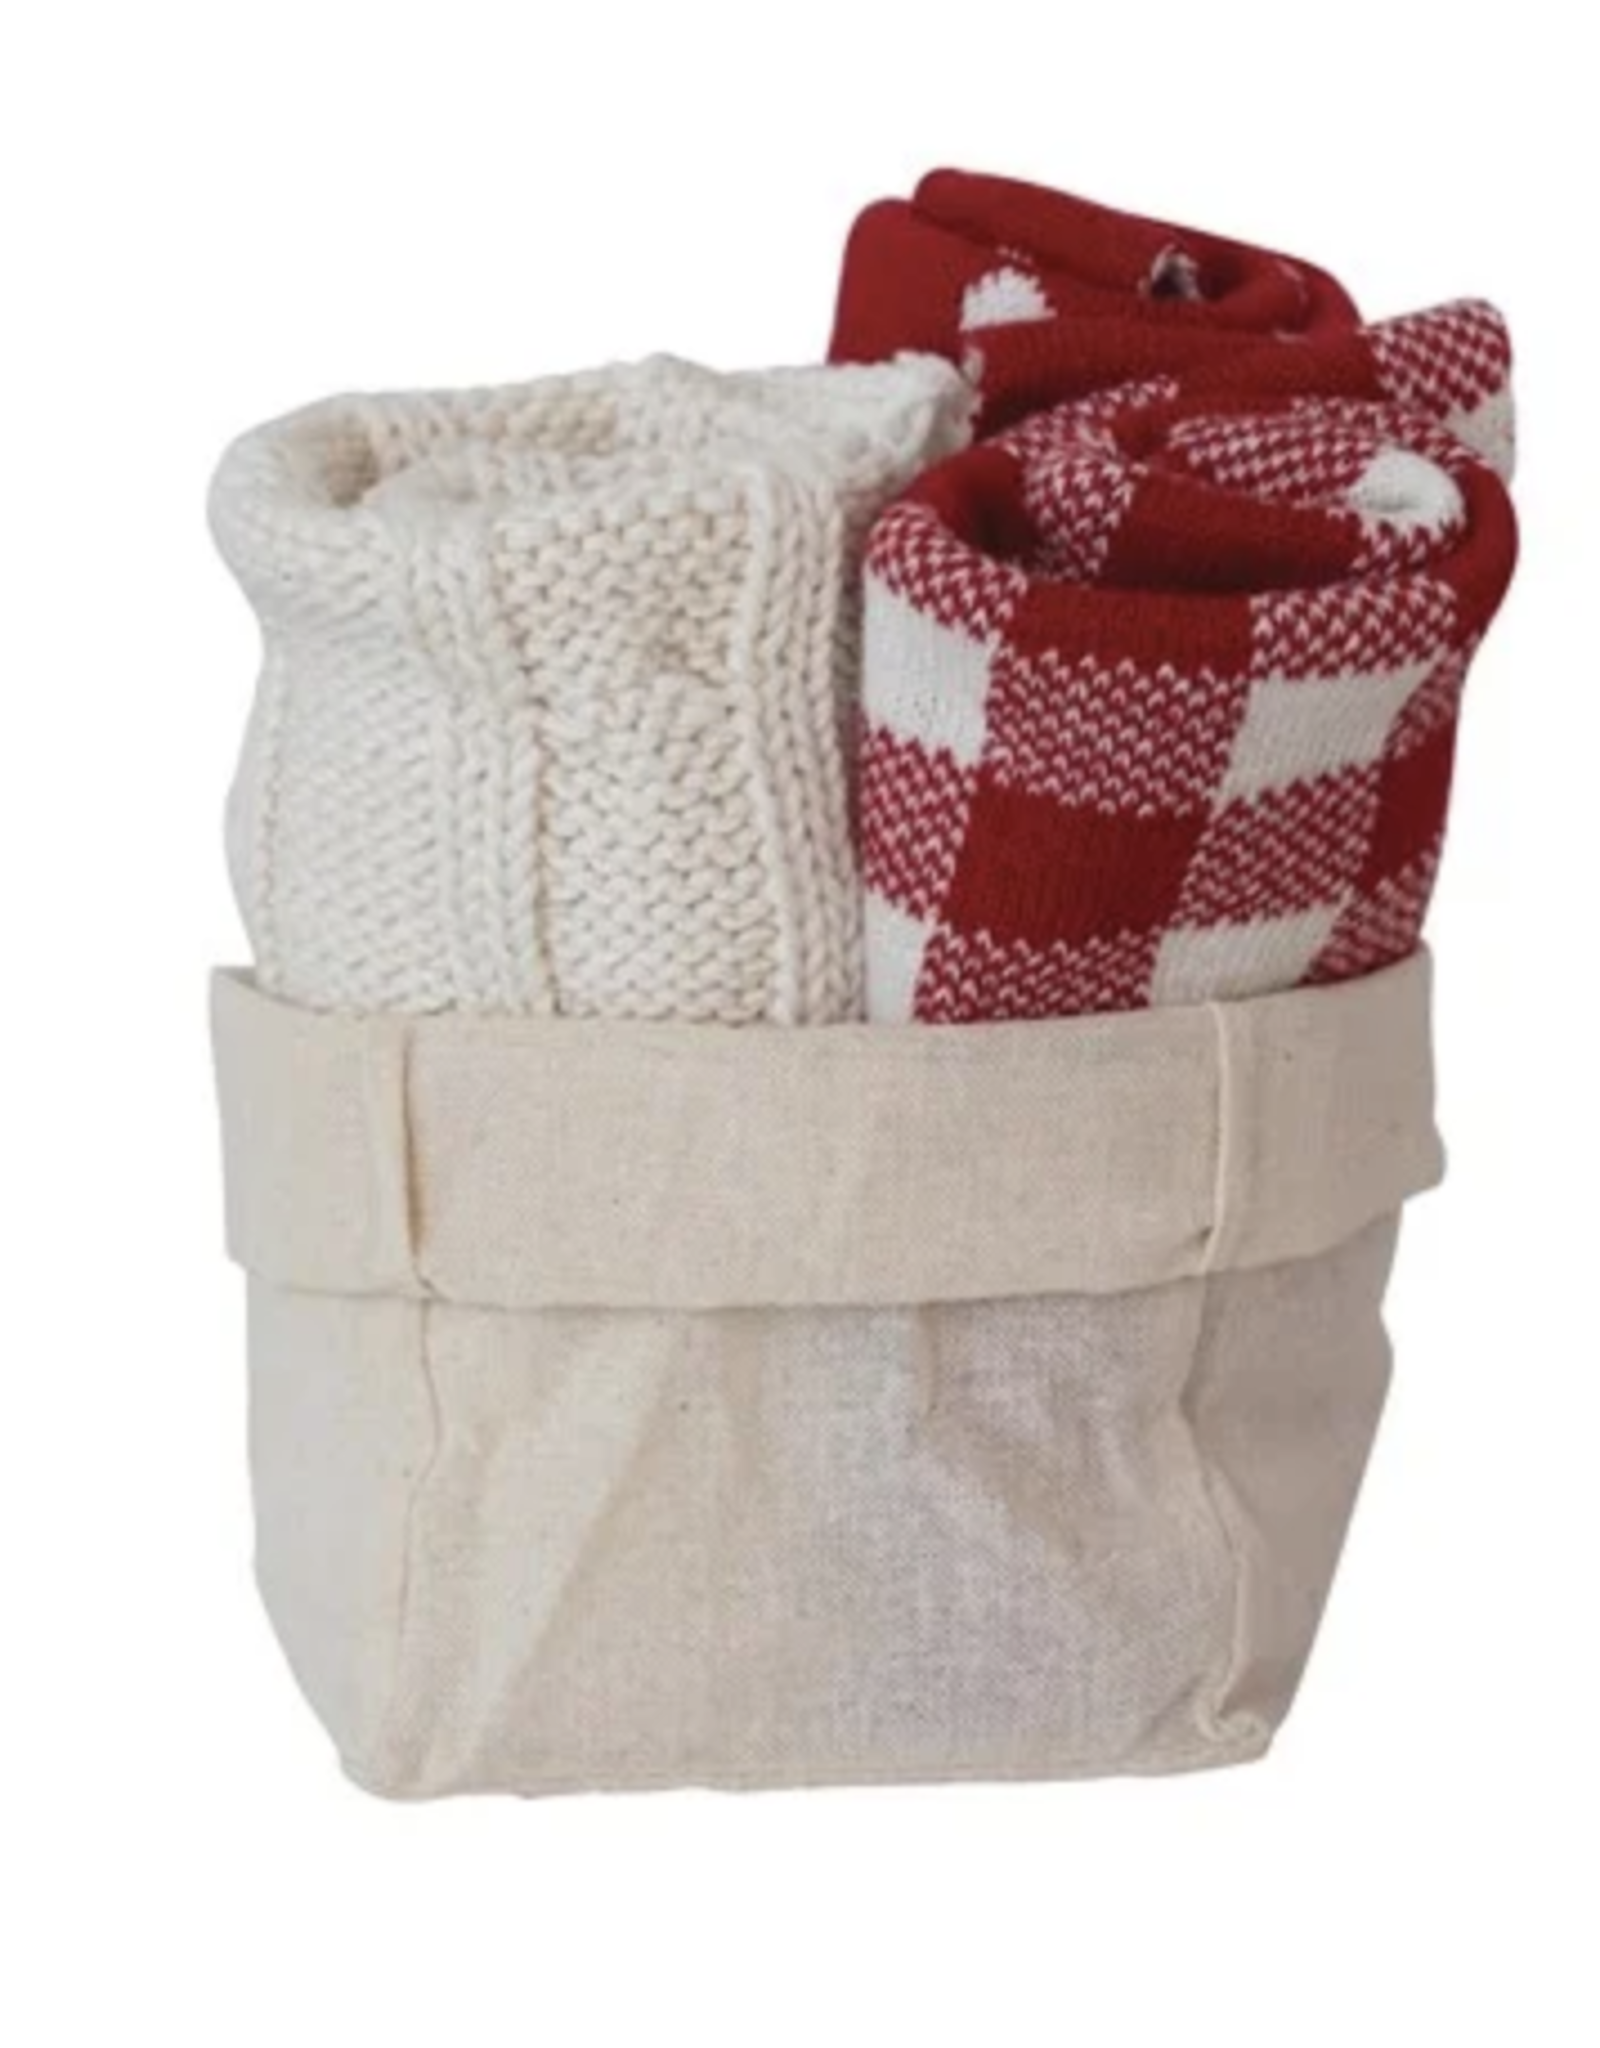 Creative Co-Op Cotton Knit Dish Cloths with Patterns, set of 3